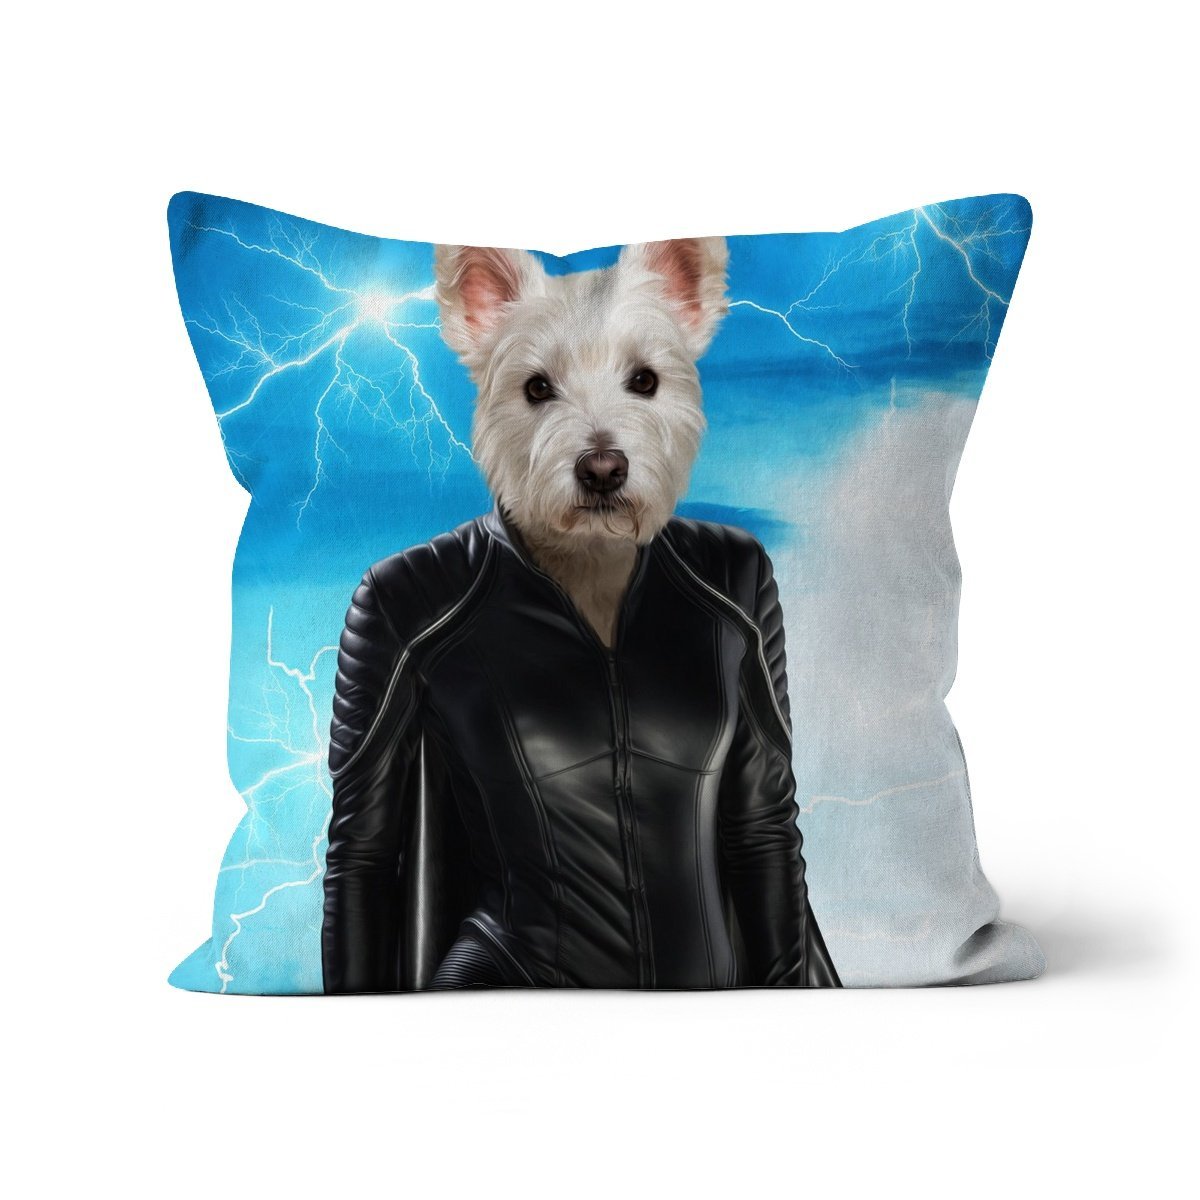 Storm (Marvel Inspired): Custom Pet Cushion - Paw & Glory - #pet portraits# - #dog portraits# - #pet portraits uk#paw and glory, pet portraits cushion,pet custom pillow, pillows of your dog, custom pillow of pet, dog on pillow, dog photo on pillow